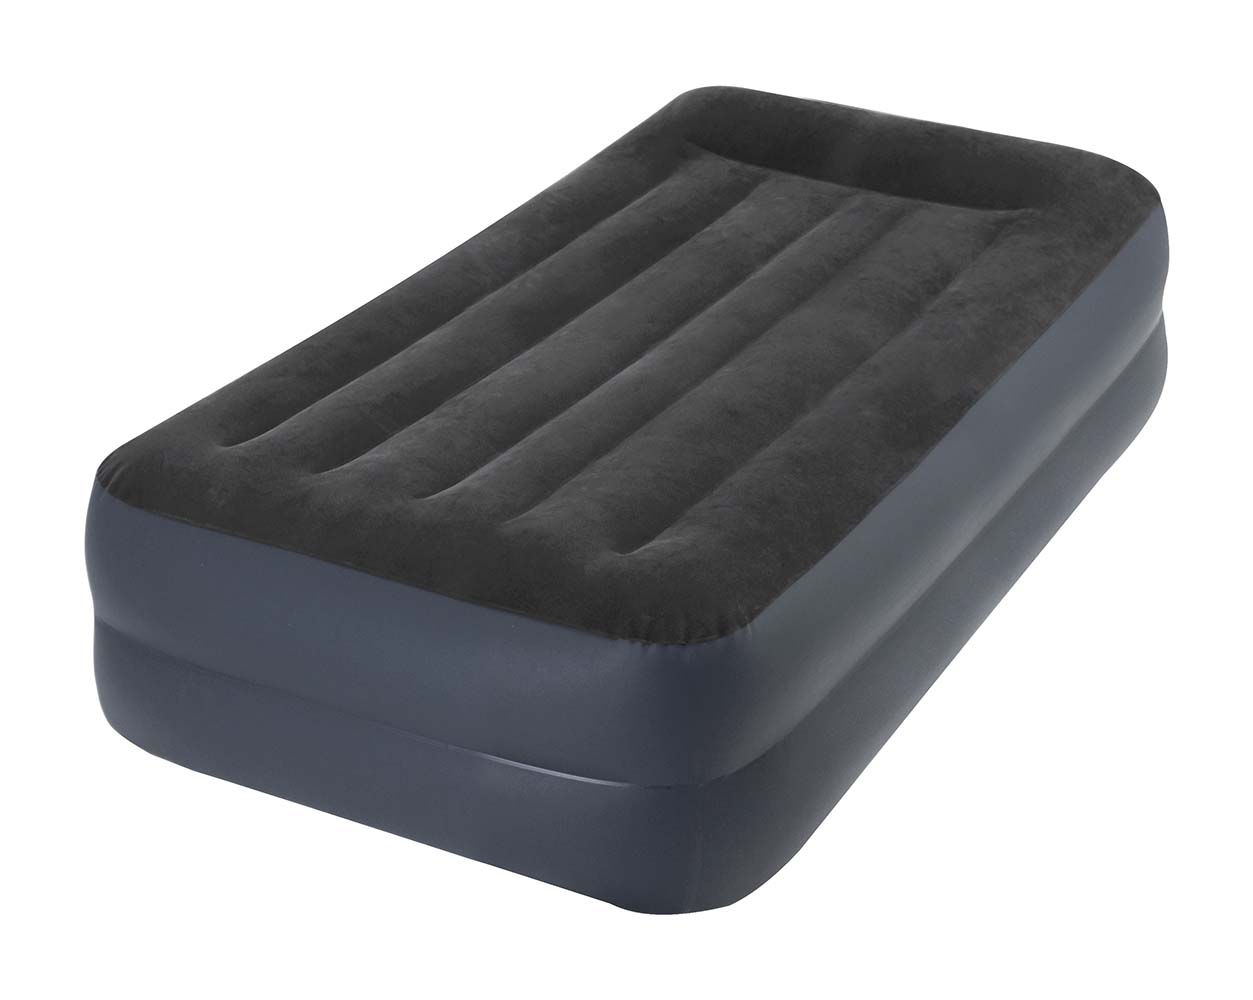 Intex - Airbed - Twin Pillow rest raised - 191x99x42 cm